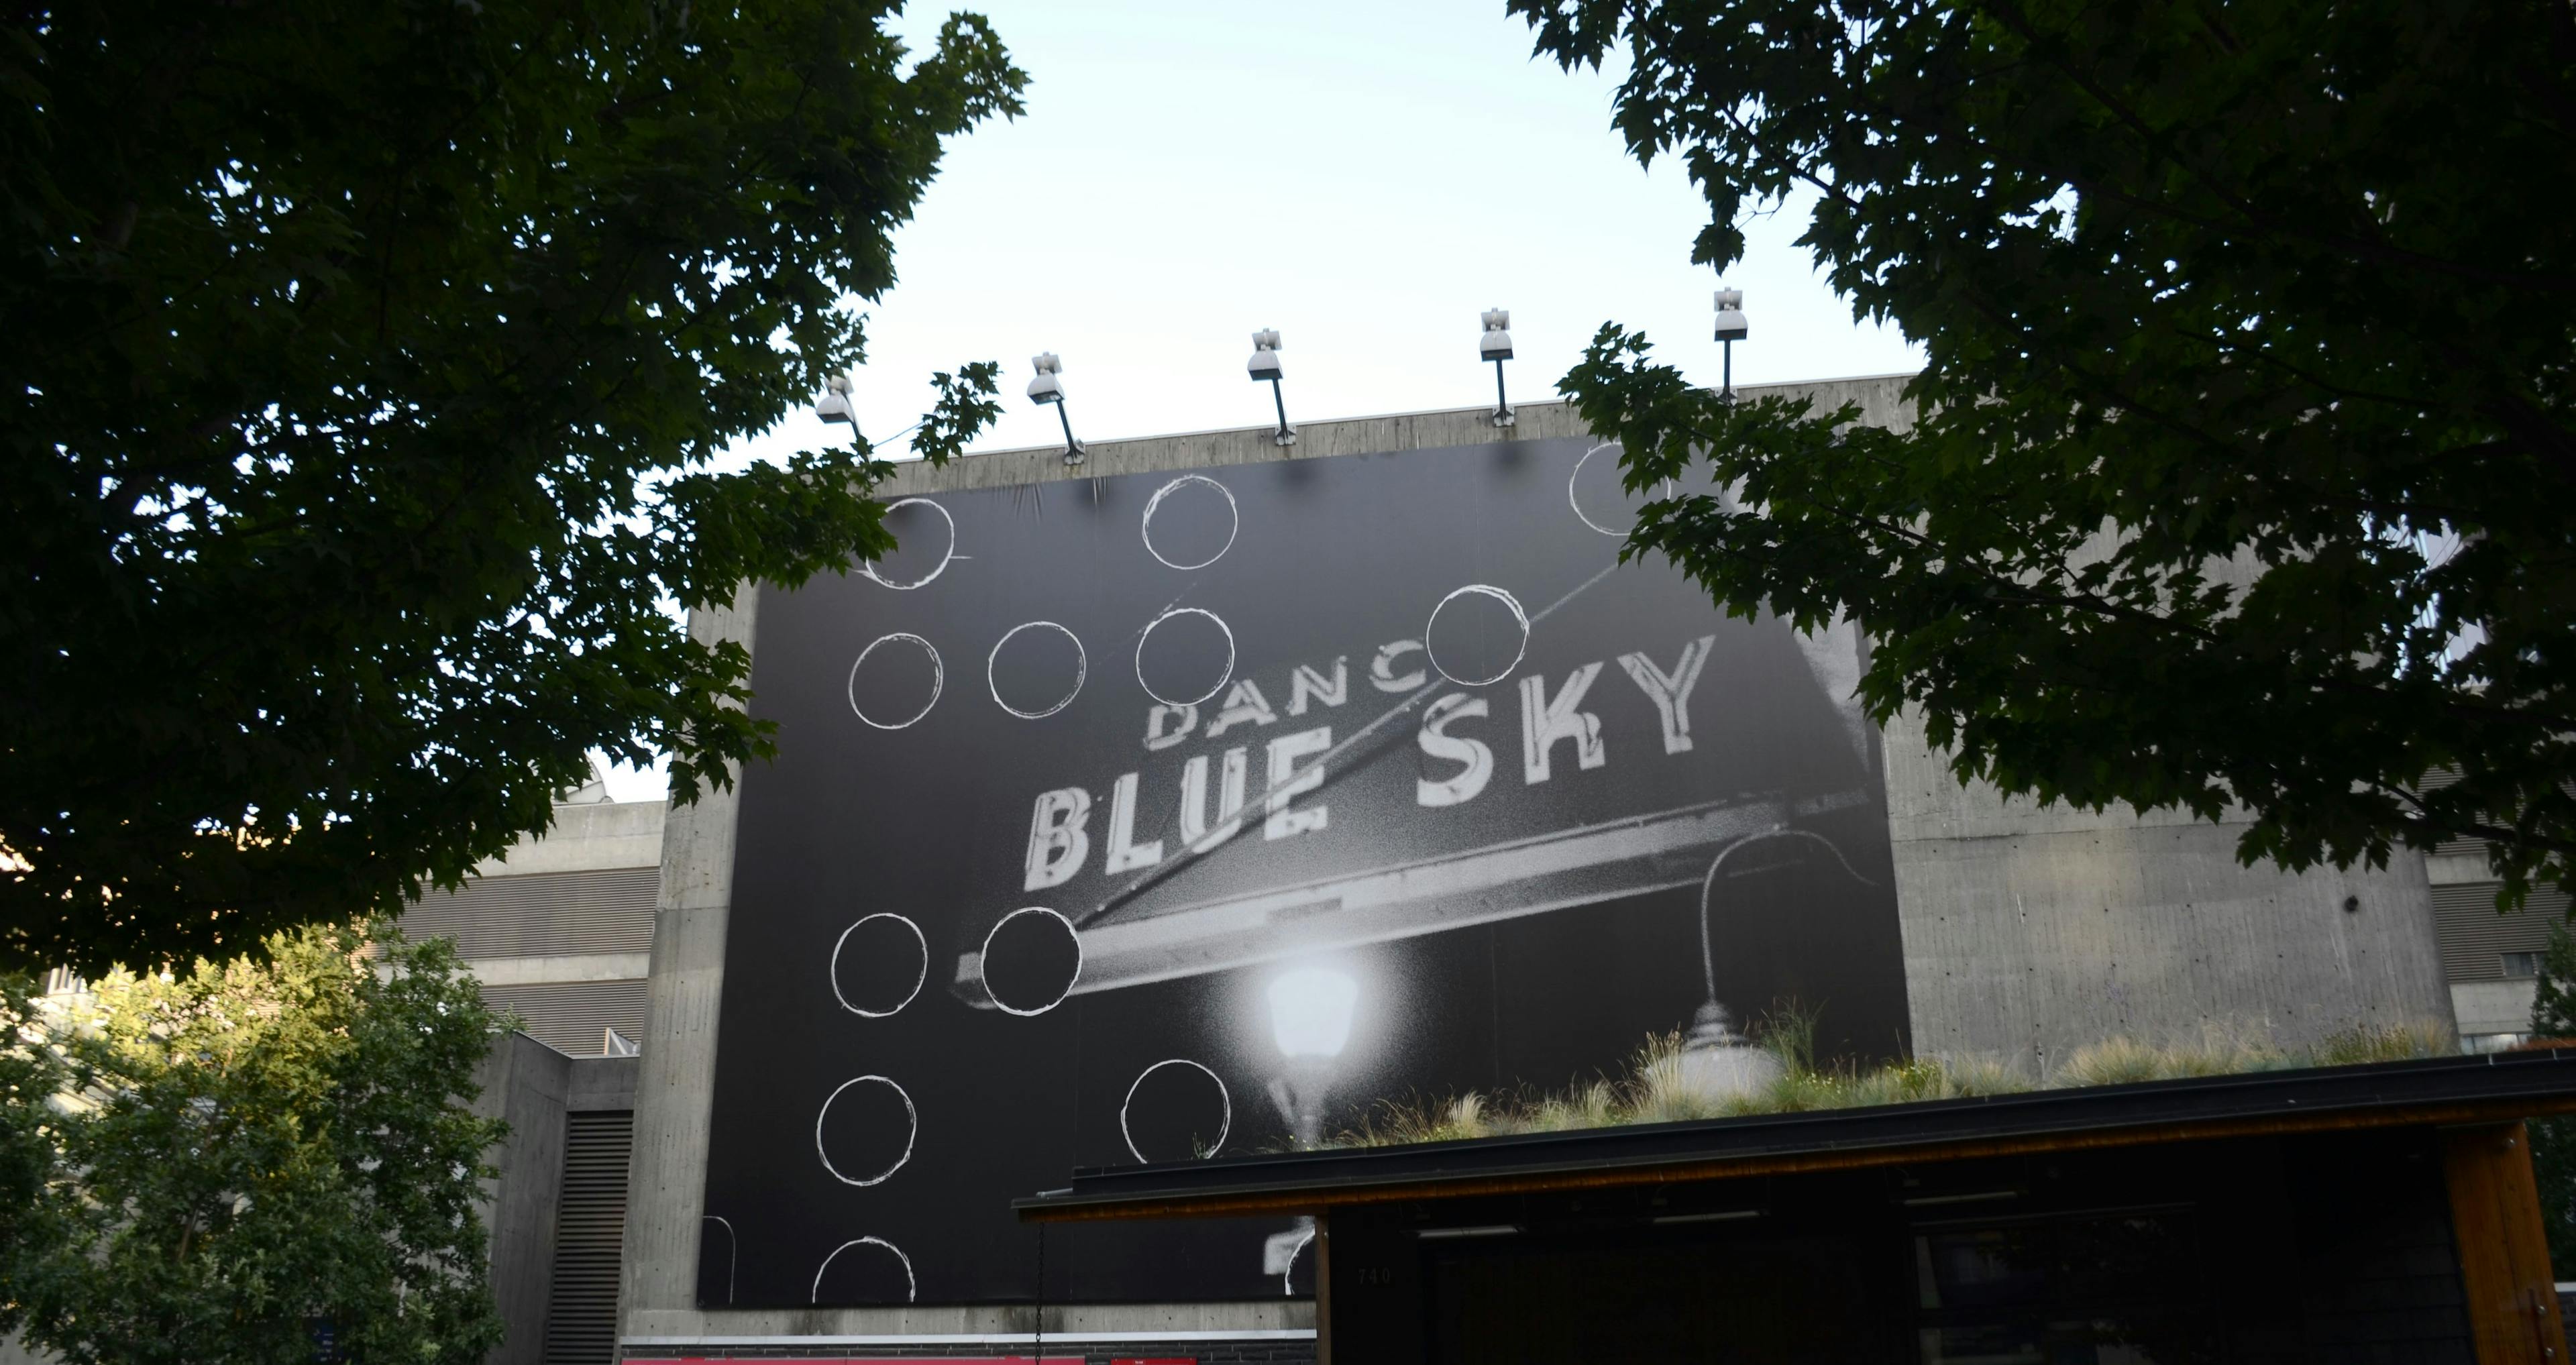 An image of the side of a building framed by two trees in the foreground. Installed on the building is a billboard-sized printed image of a neon sign and street light. The neon sign reads BLUE SKY.